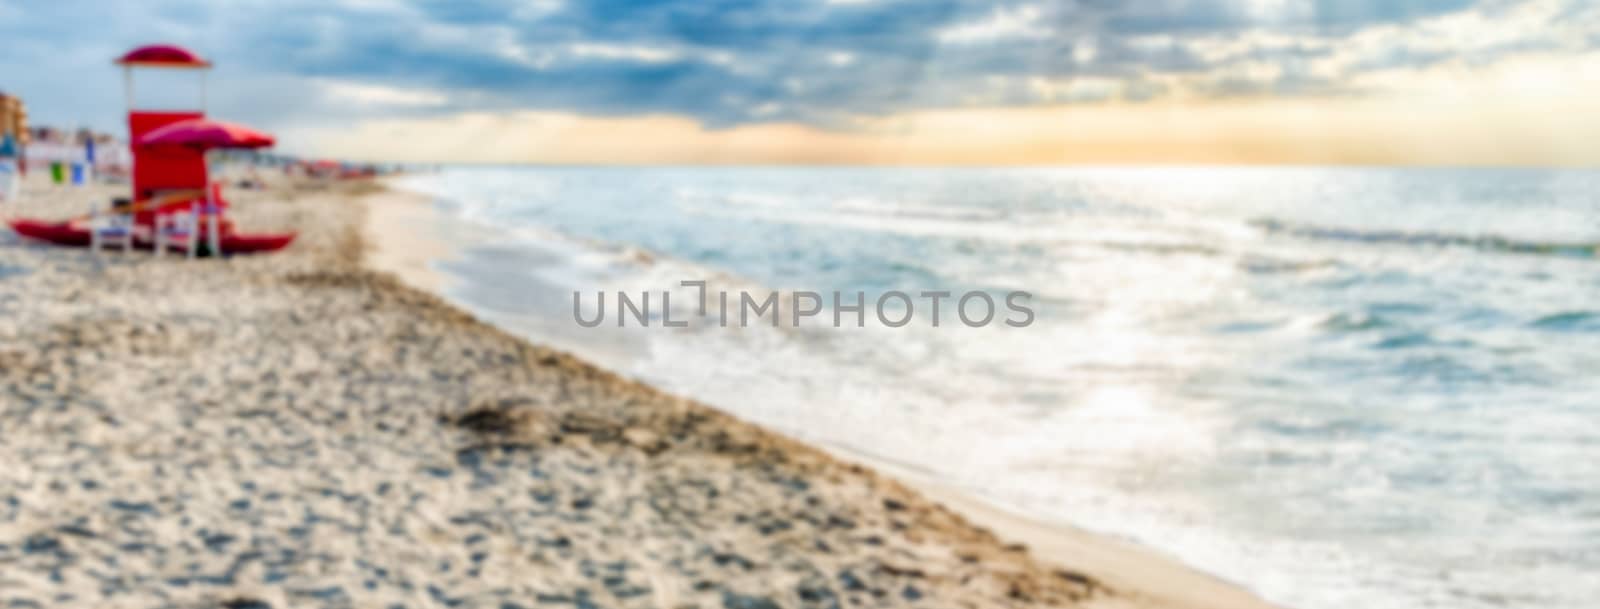 Defocused background of a scenic beach in central Italy by marcorubino